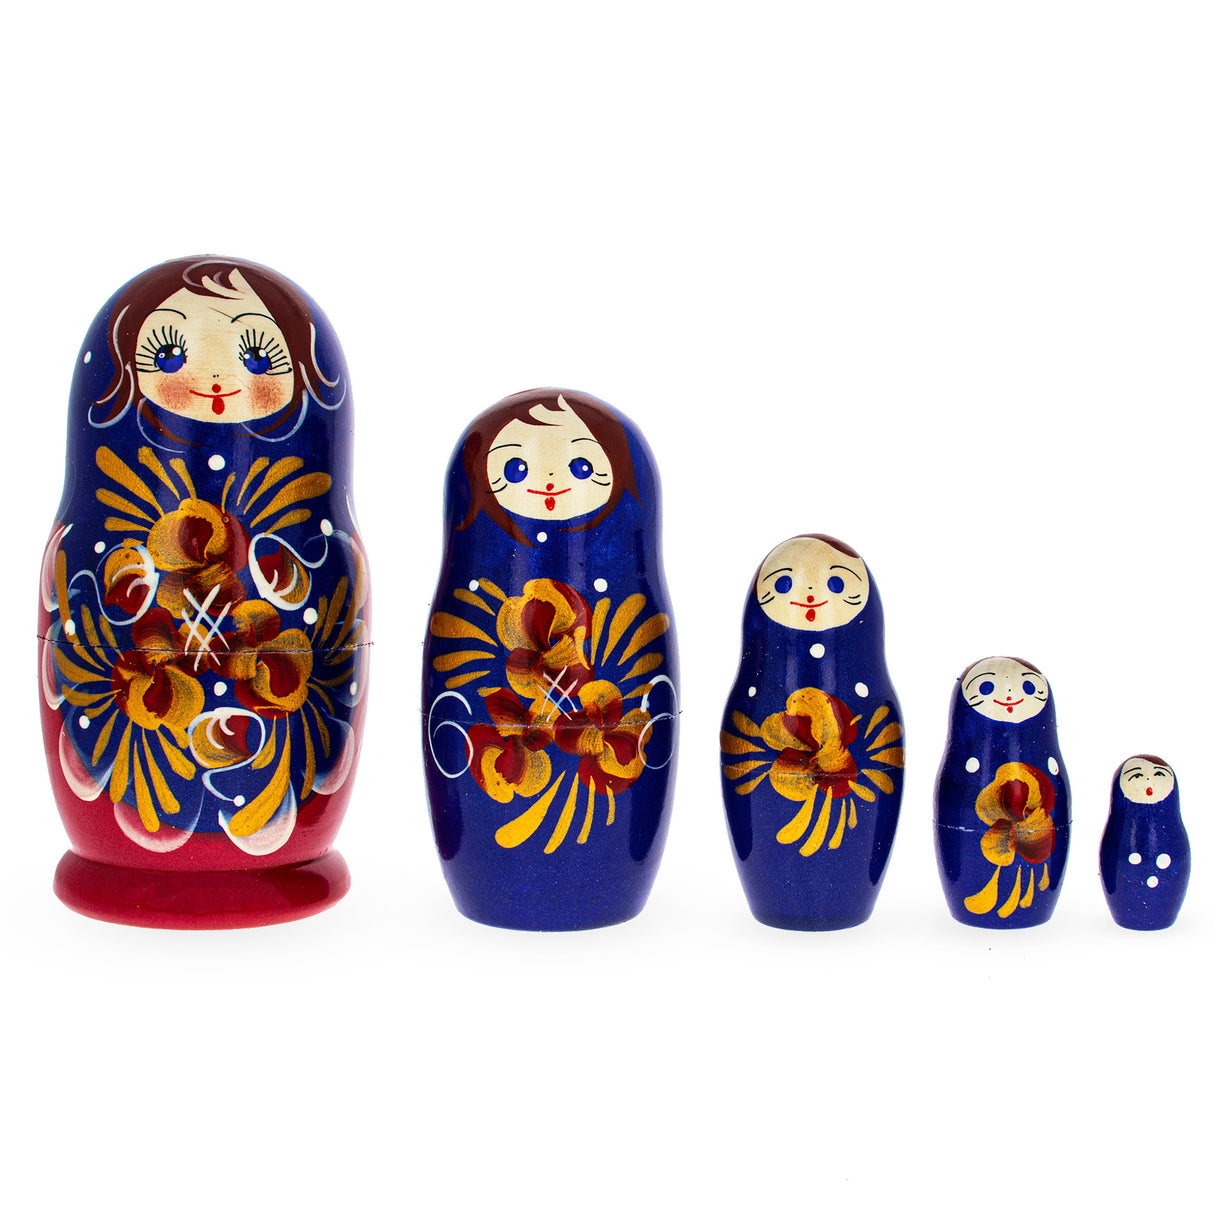 Wood Beautiful Wooden  with Blue Color Hood and Gold Flowers Nesting Dolls in Blue color